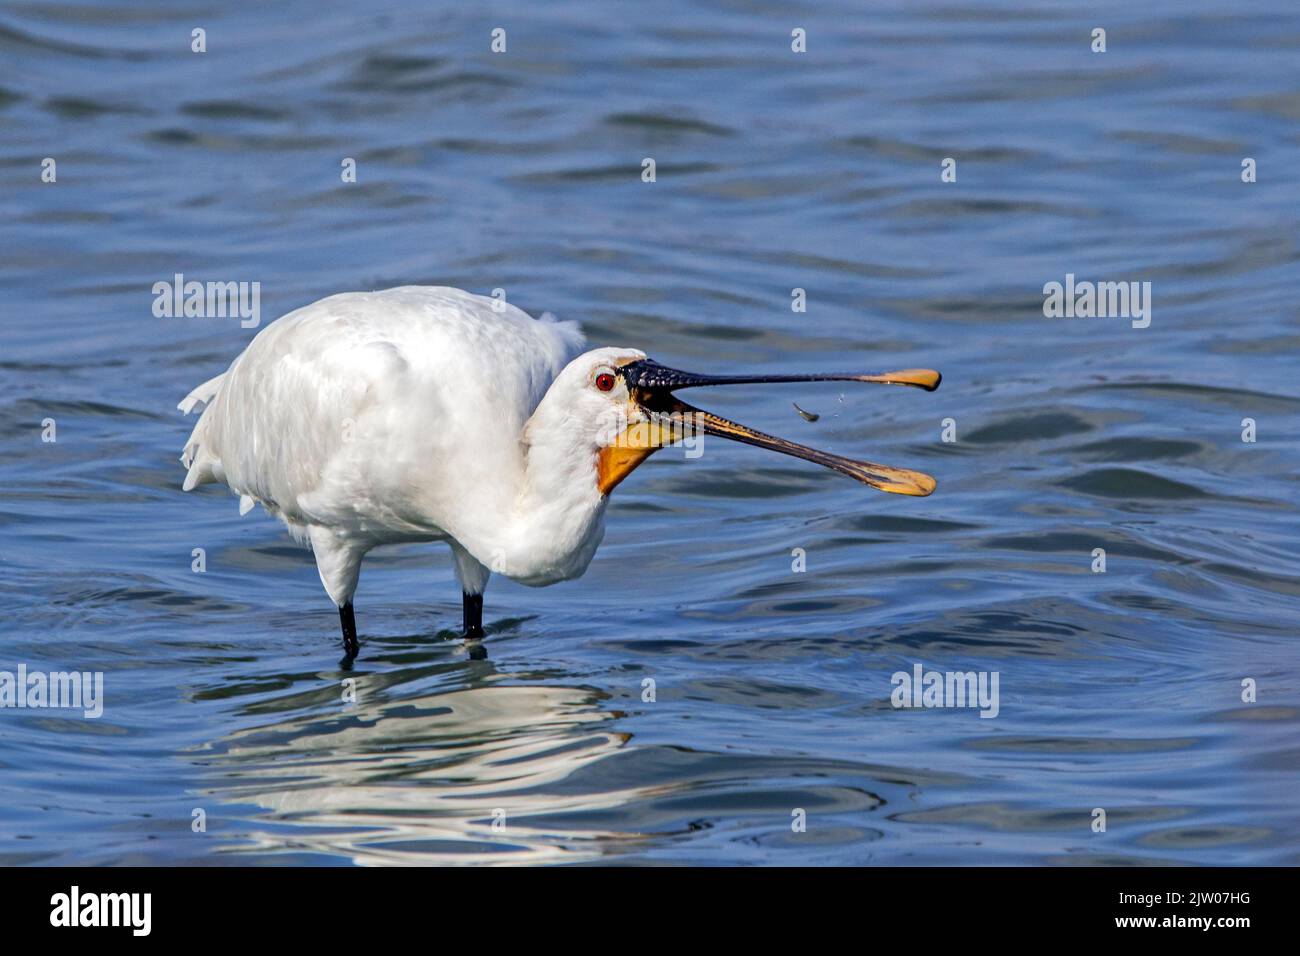 Eurasian spoonbill / common spoonbill (Platalea leucorodia) adult catching little goby fish in open beak in shallow water at wetland in late summer Stock Photo